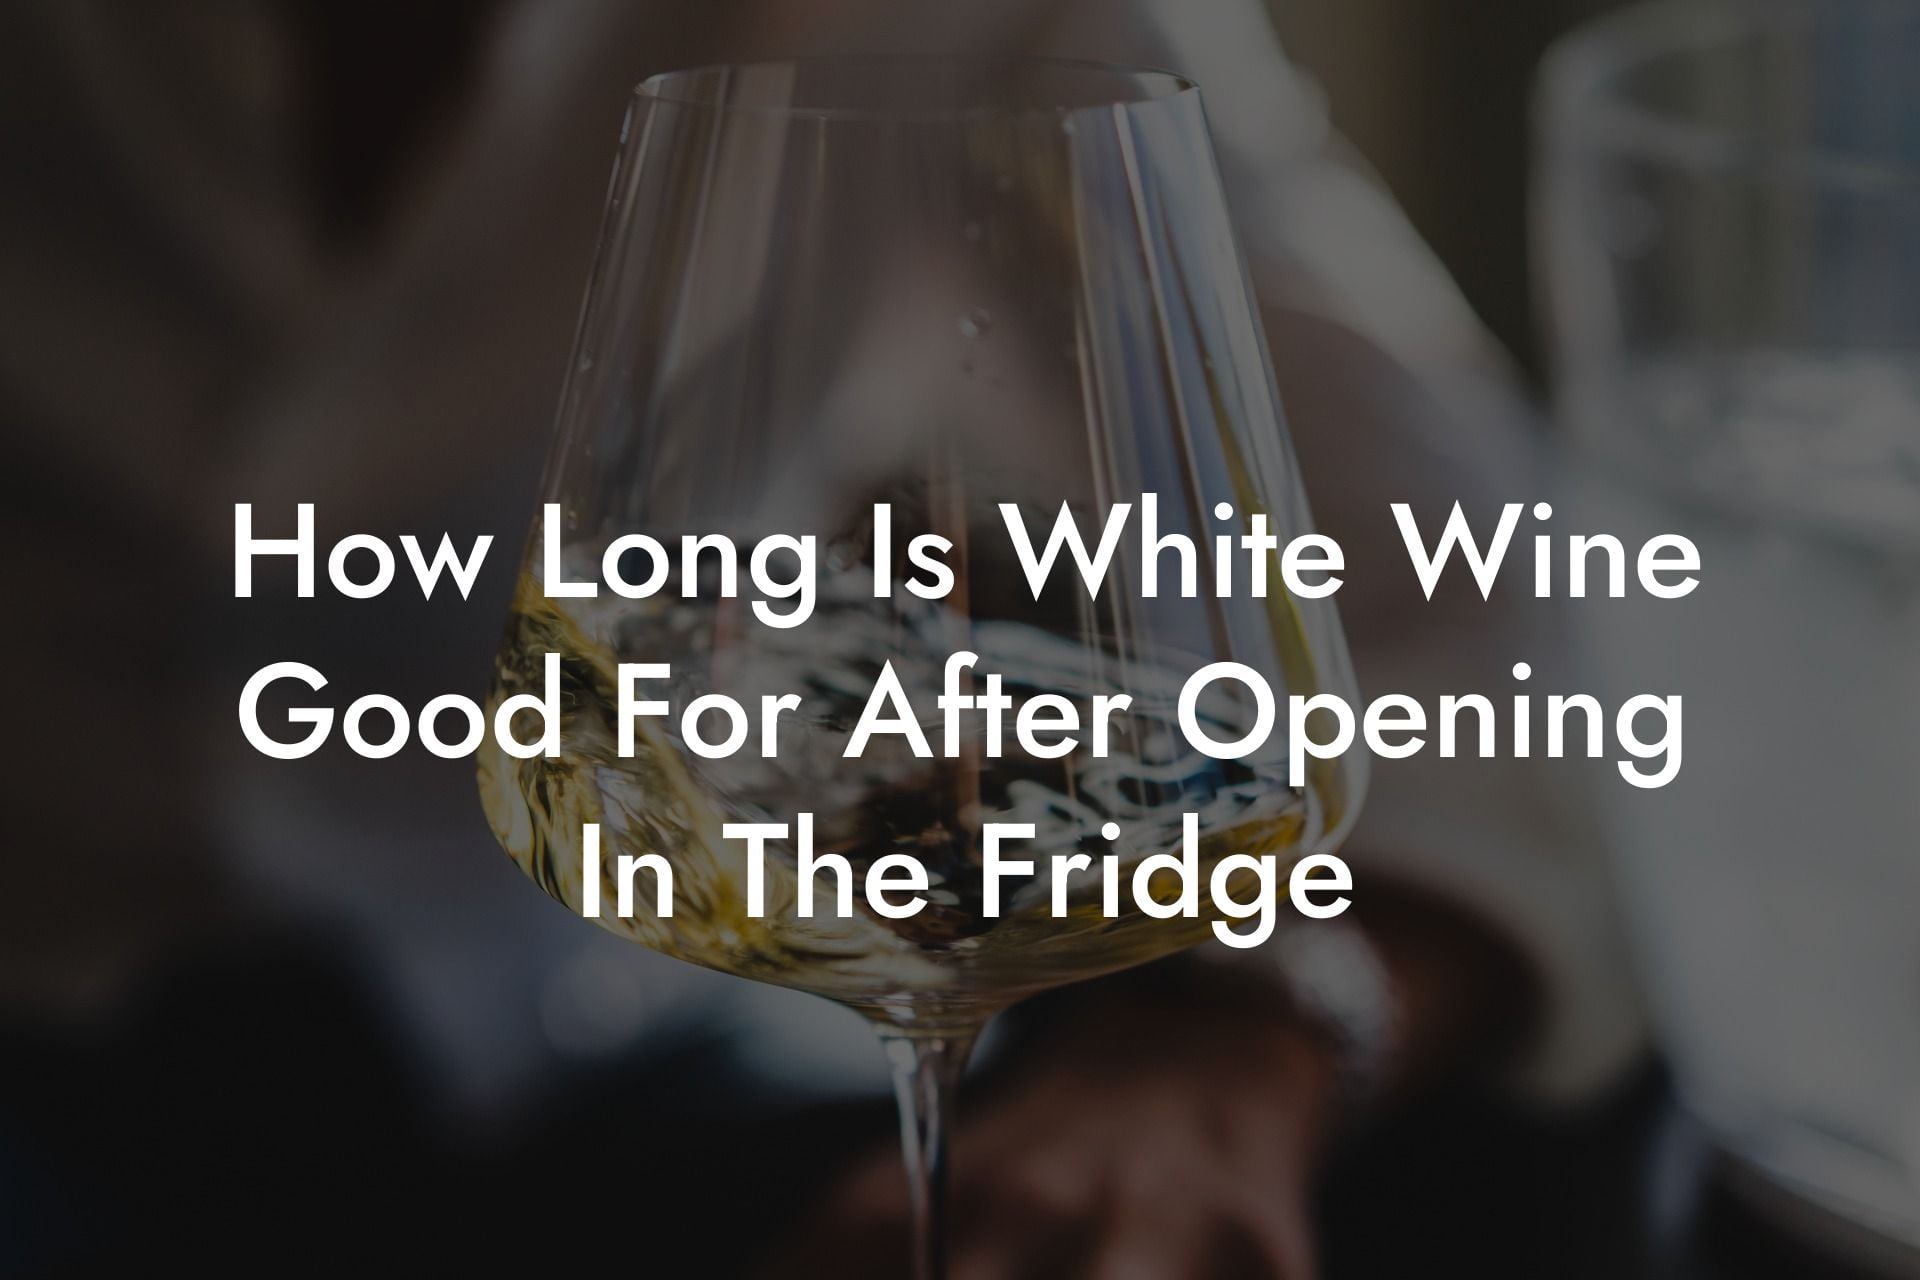 How Long Is White Wine Good For After Opening In The Fridge